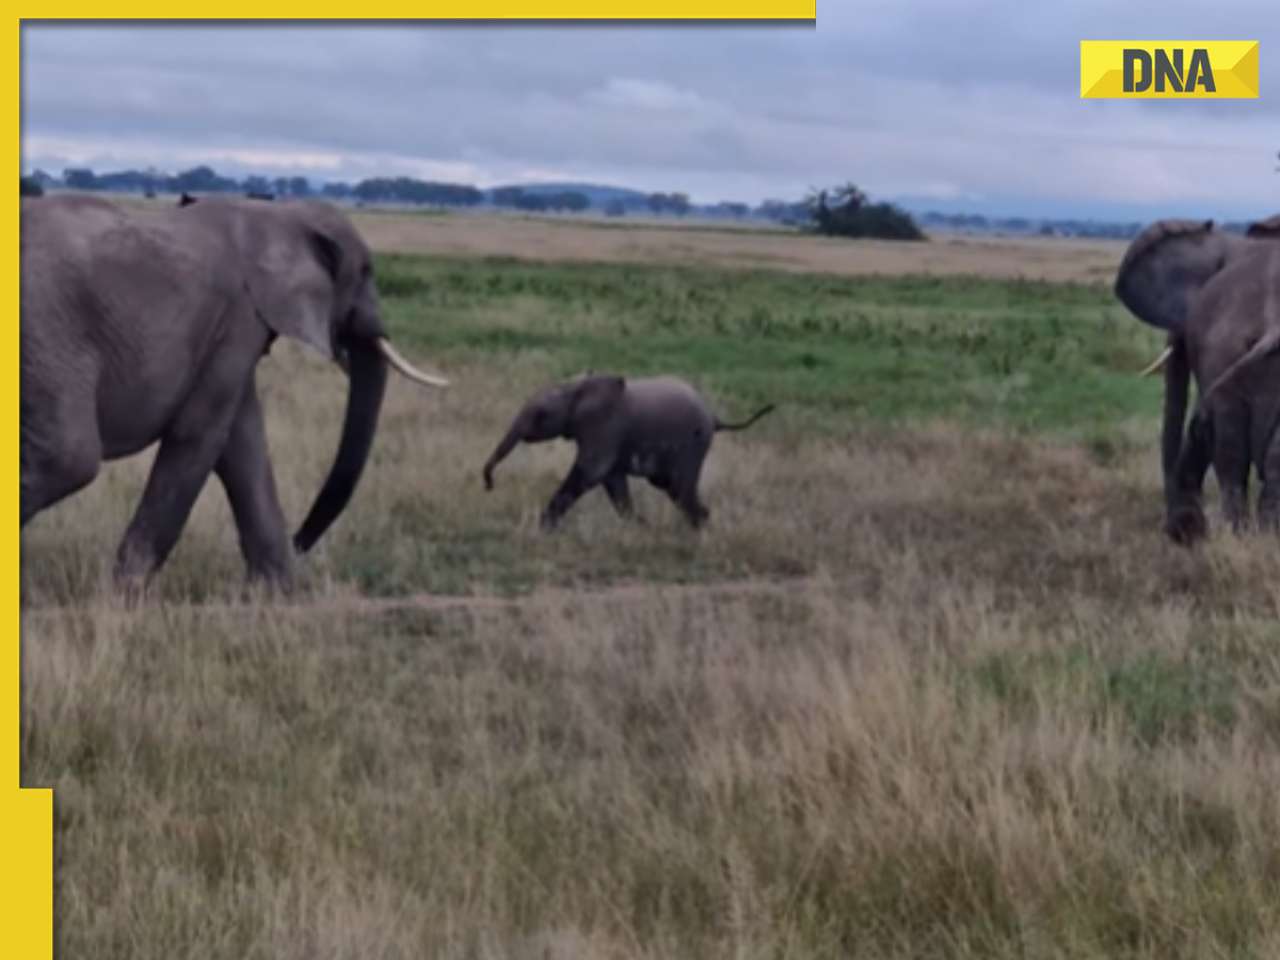 Viral video: Adorable baby elephant's quest for mom melts hearts online